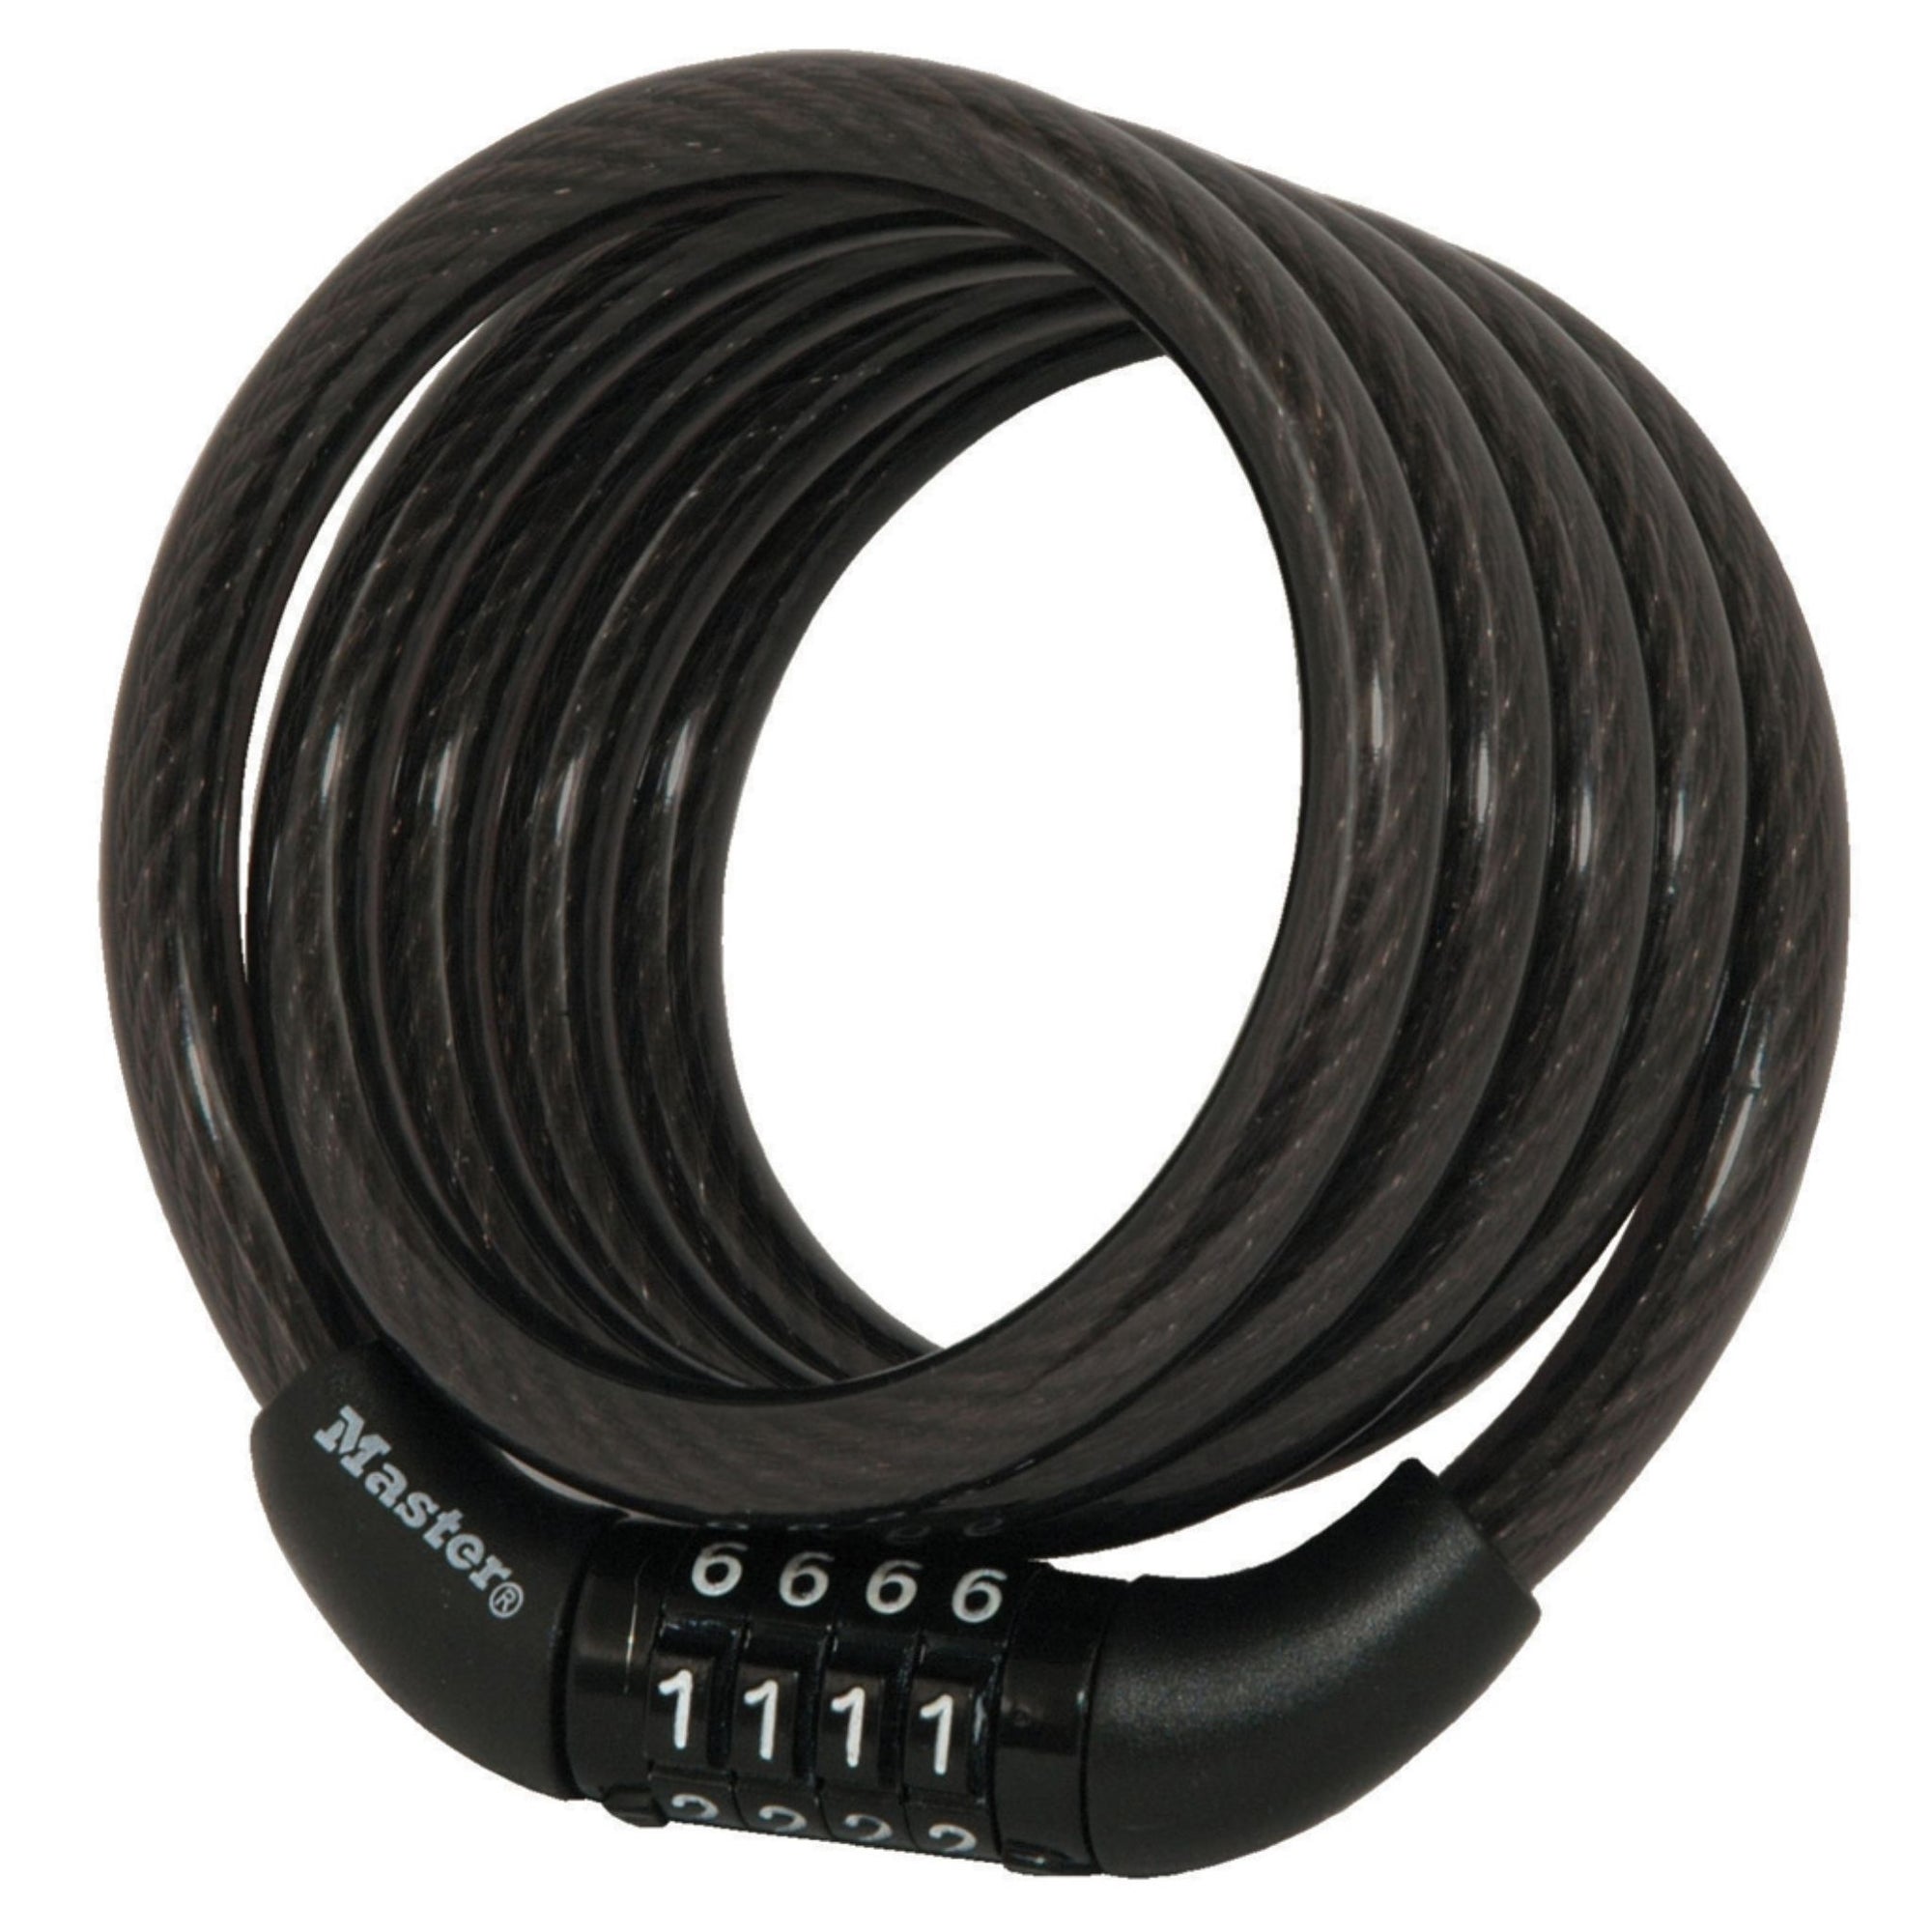 Master Lock No. 8143D Combination Cable Lock - The Lock Source